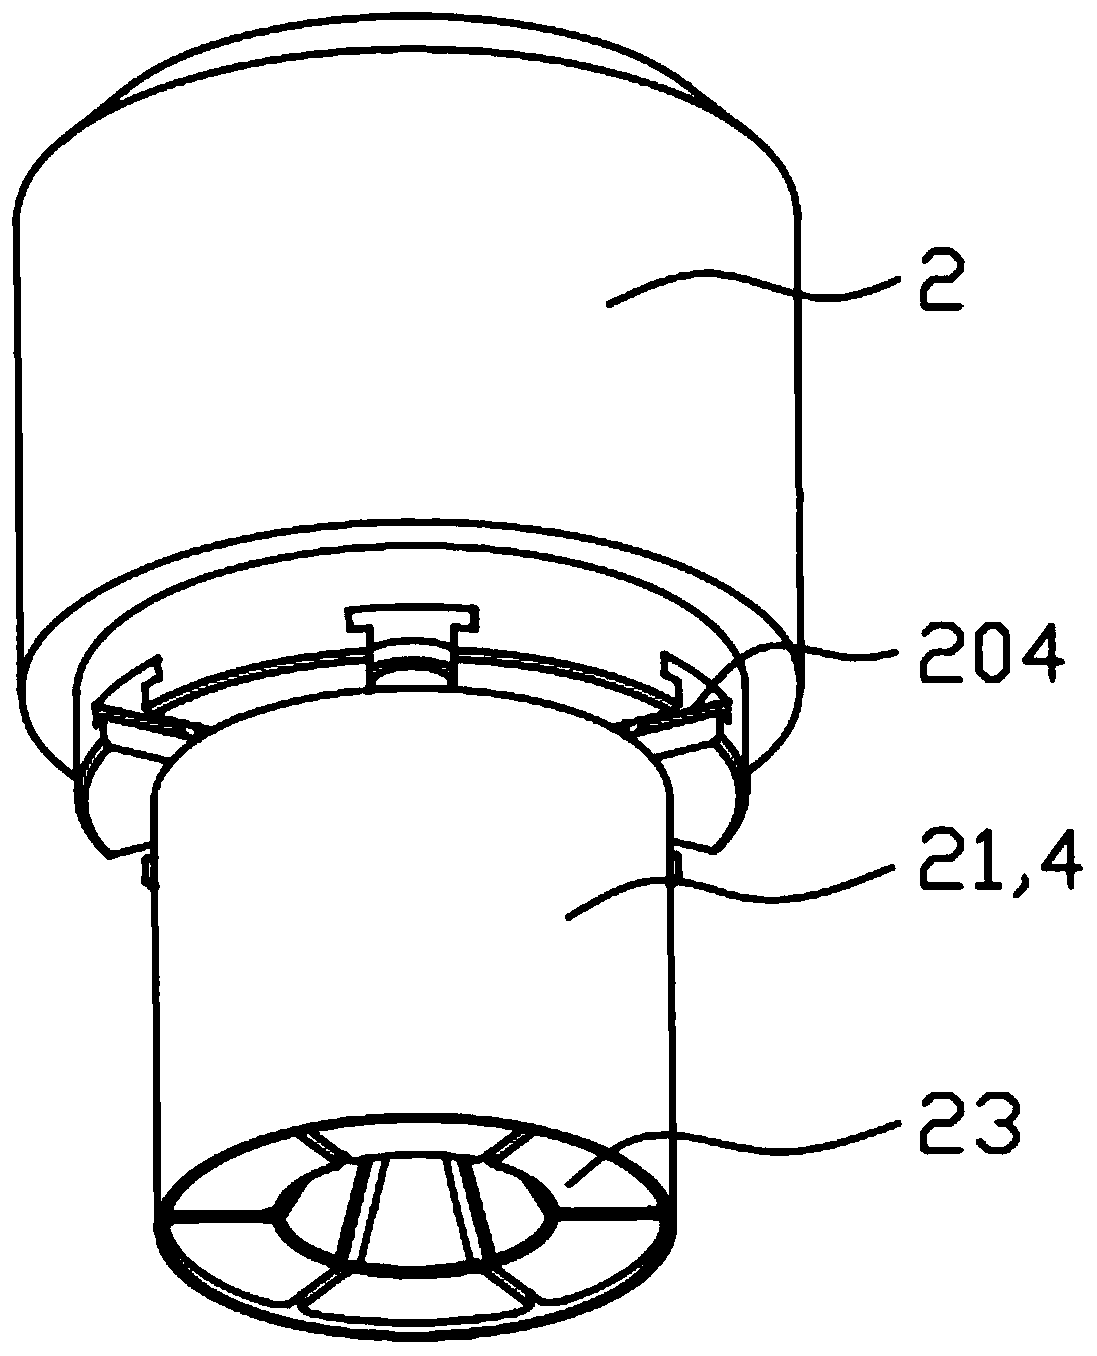 Self-adaptive joint for suction pipe